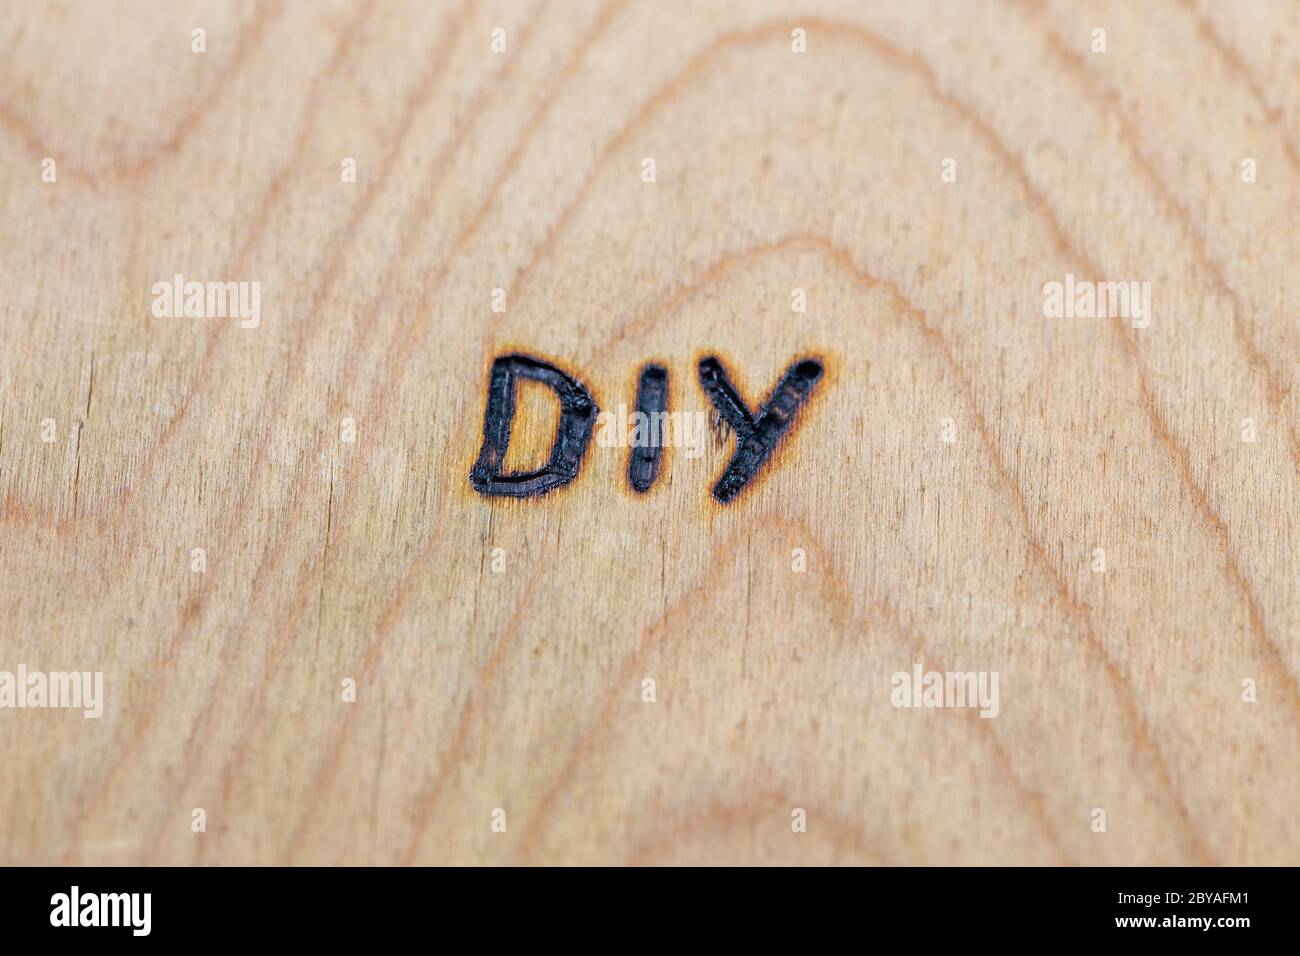 an abbreviation DIY - do it yourself - burned by hand with electrical woodburner on plywood surface Stock Photo